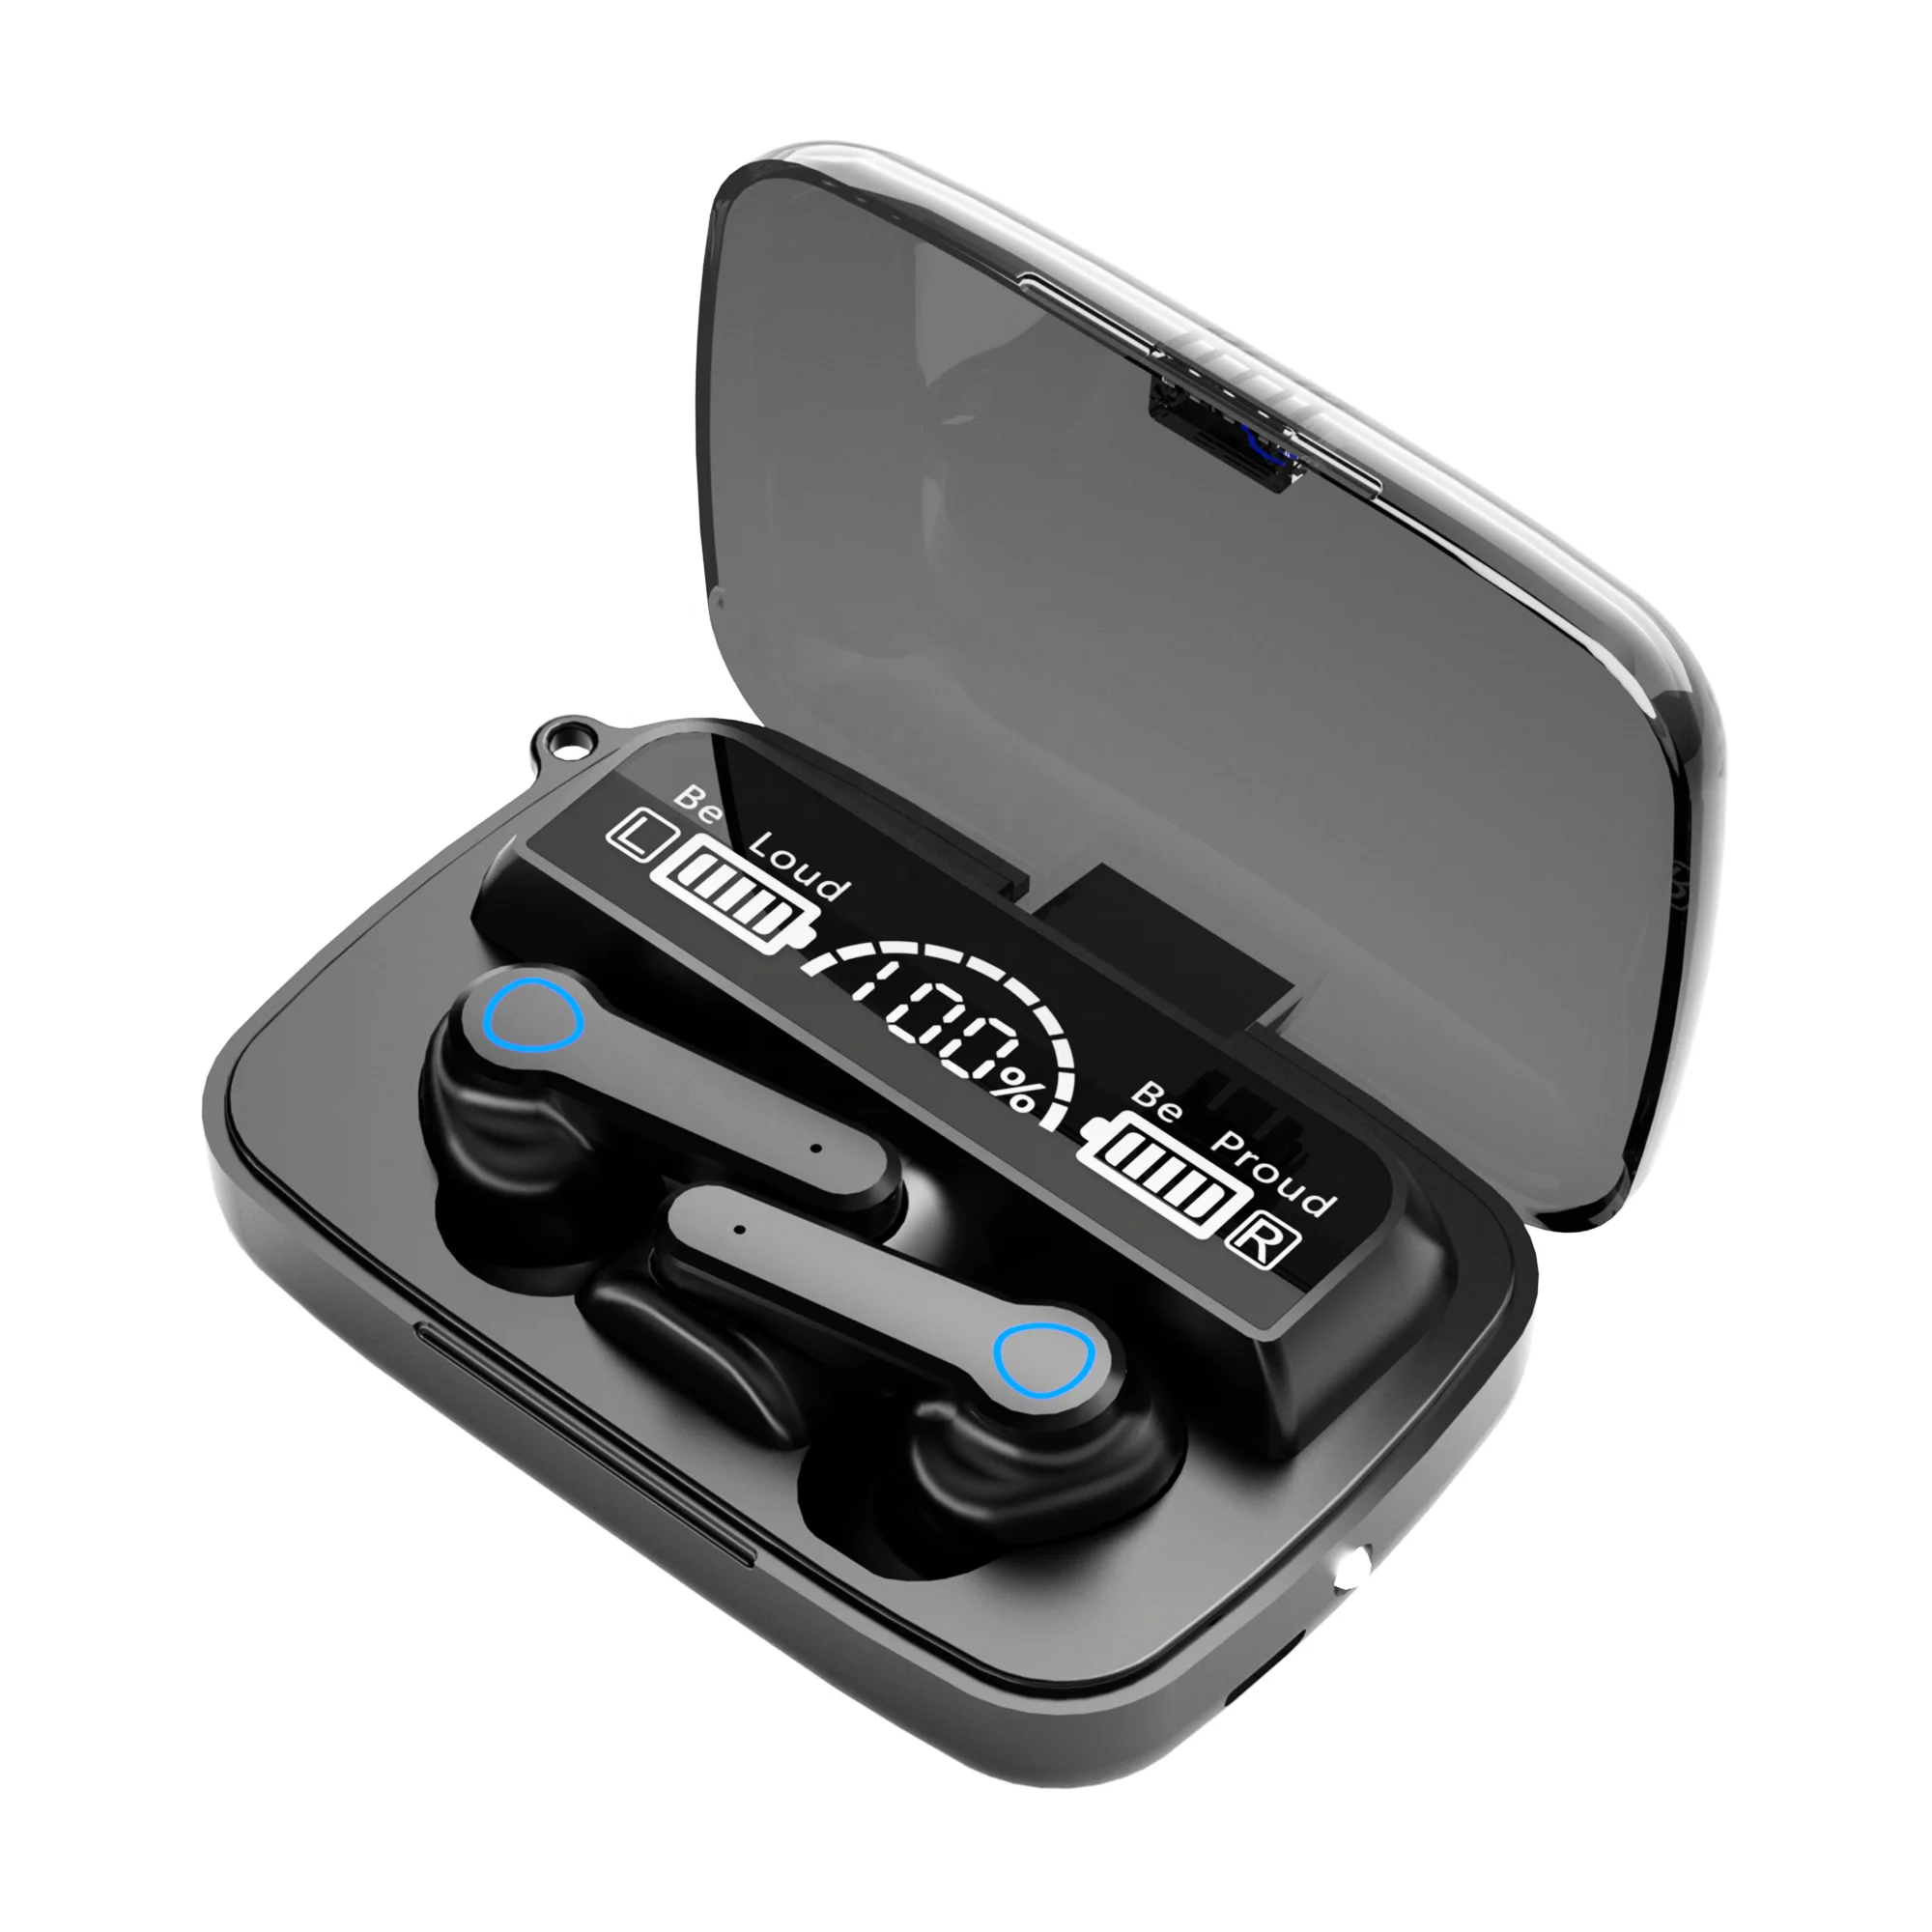 

2021 Trending Audifonos M19 TWS Free Sample Wireless Earbuds Earphones Headsets Audifonos For Mobile Phone